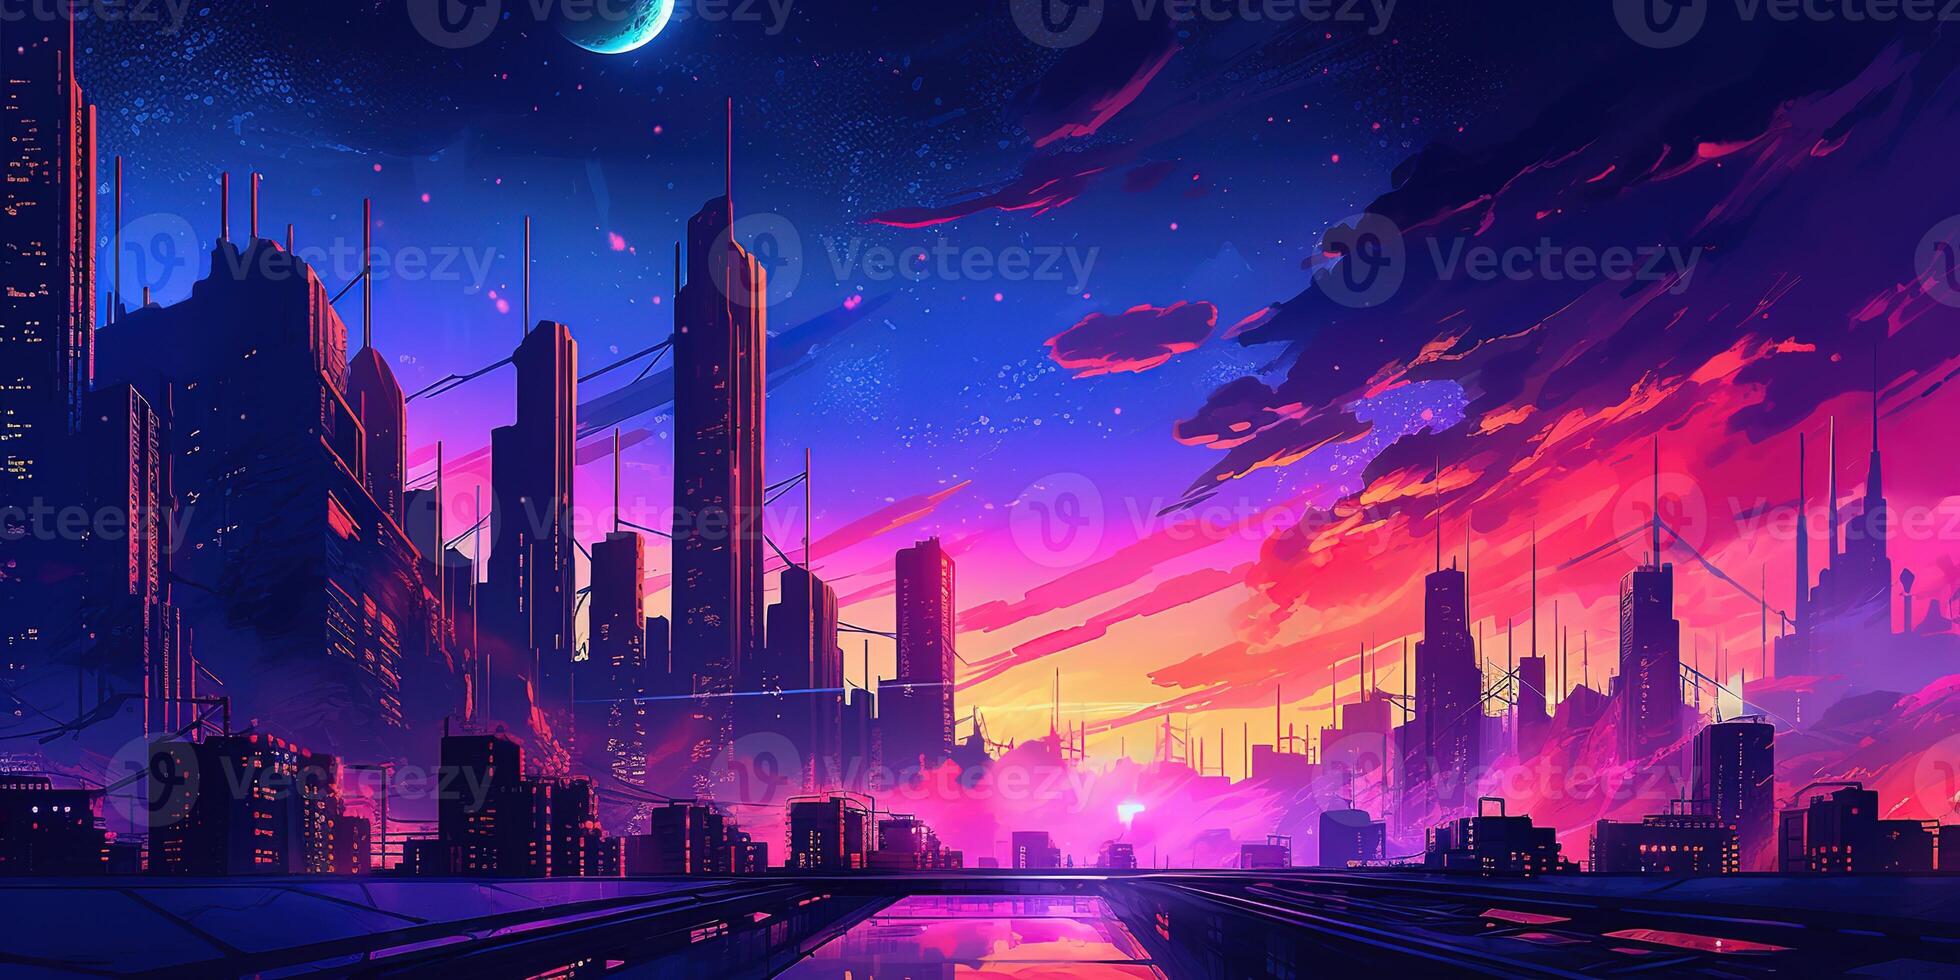 Aesthetic city synthwave wallpaper with a cool and vibrant neon design, photo